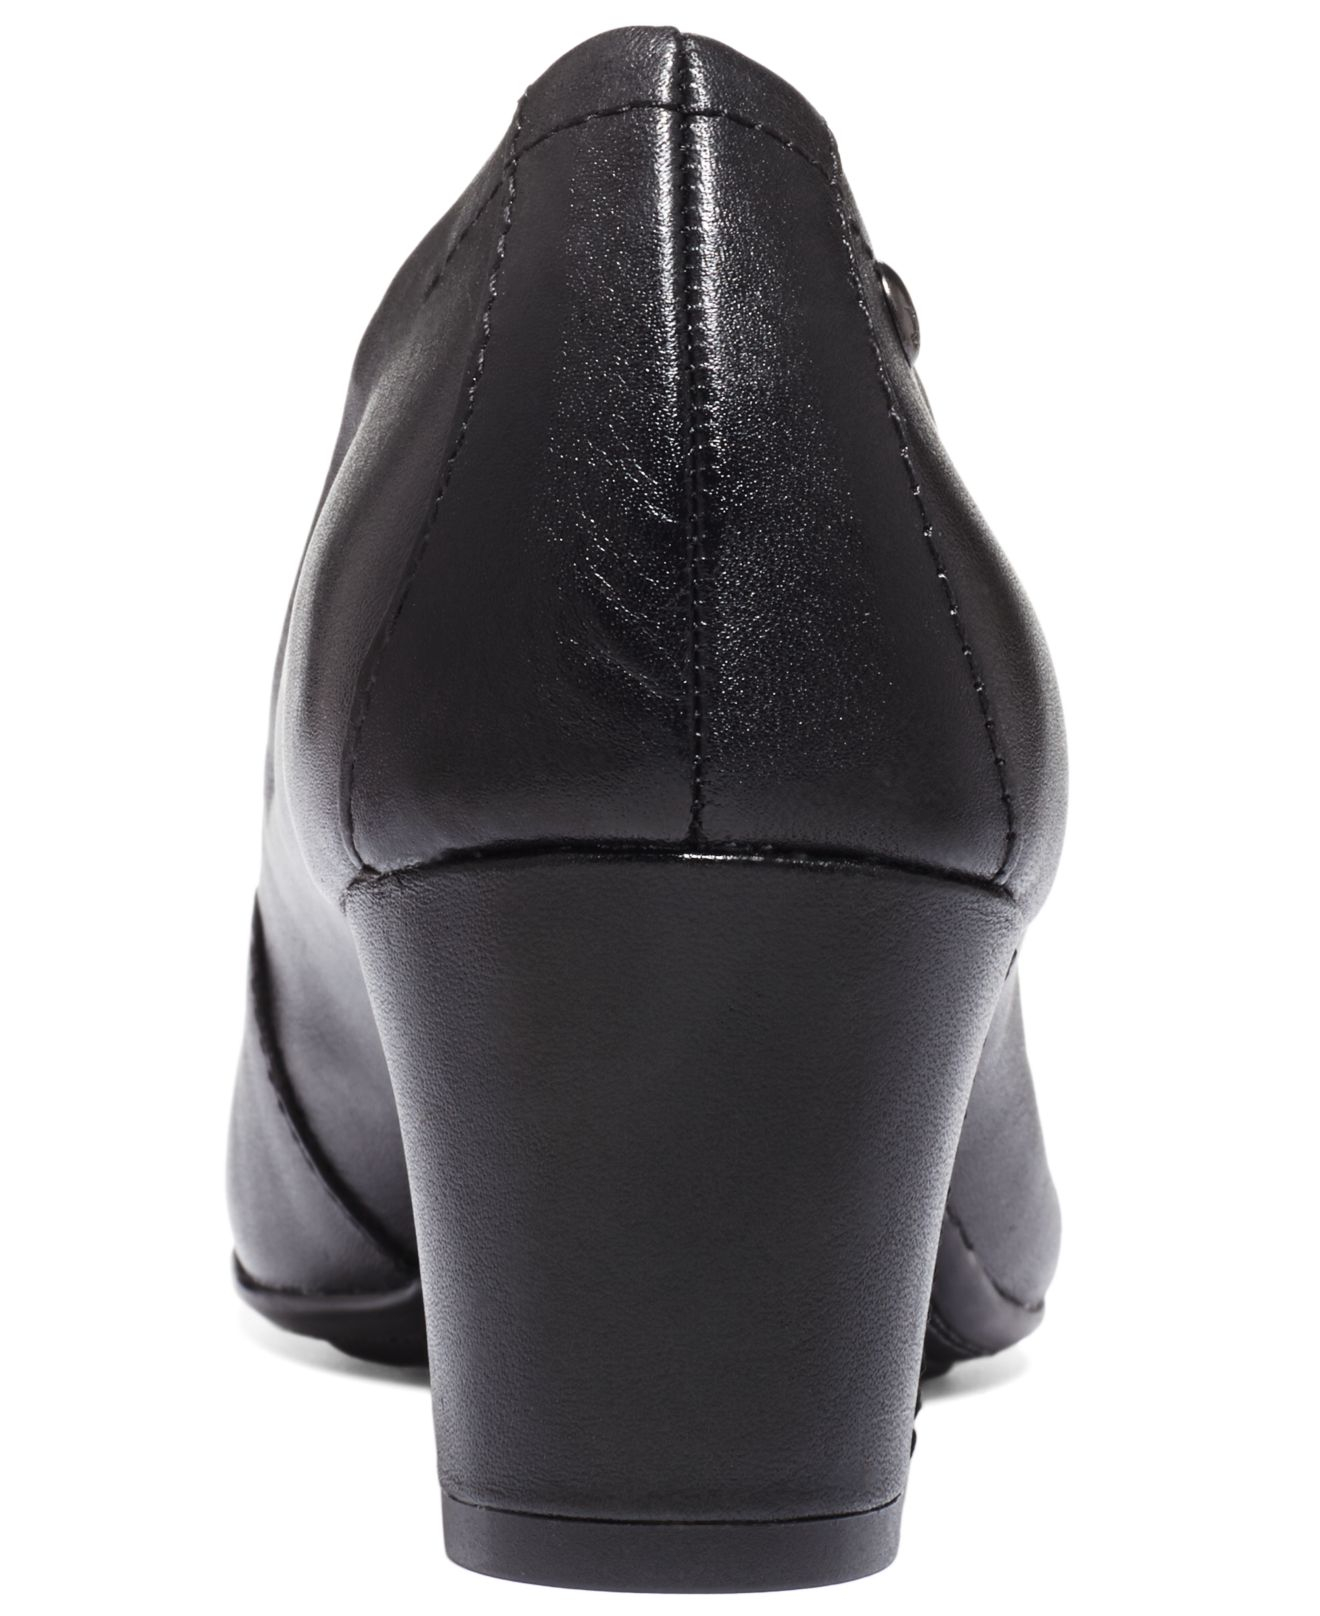 Lyst - Hush puppies Womens Imagery Pumps in Black